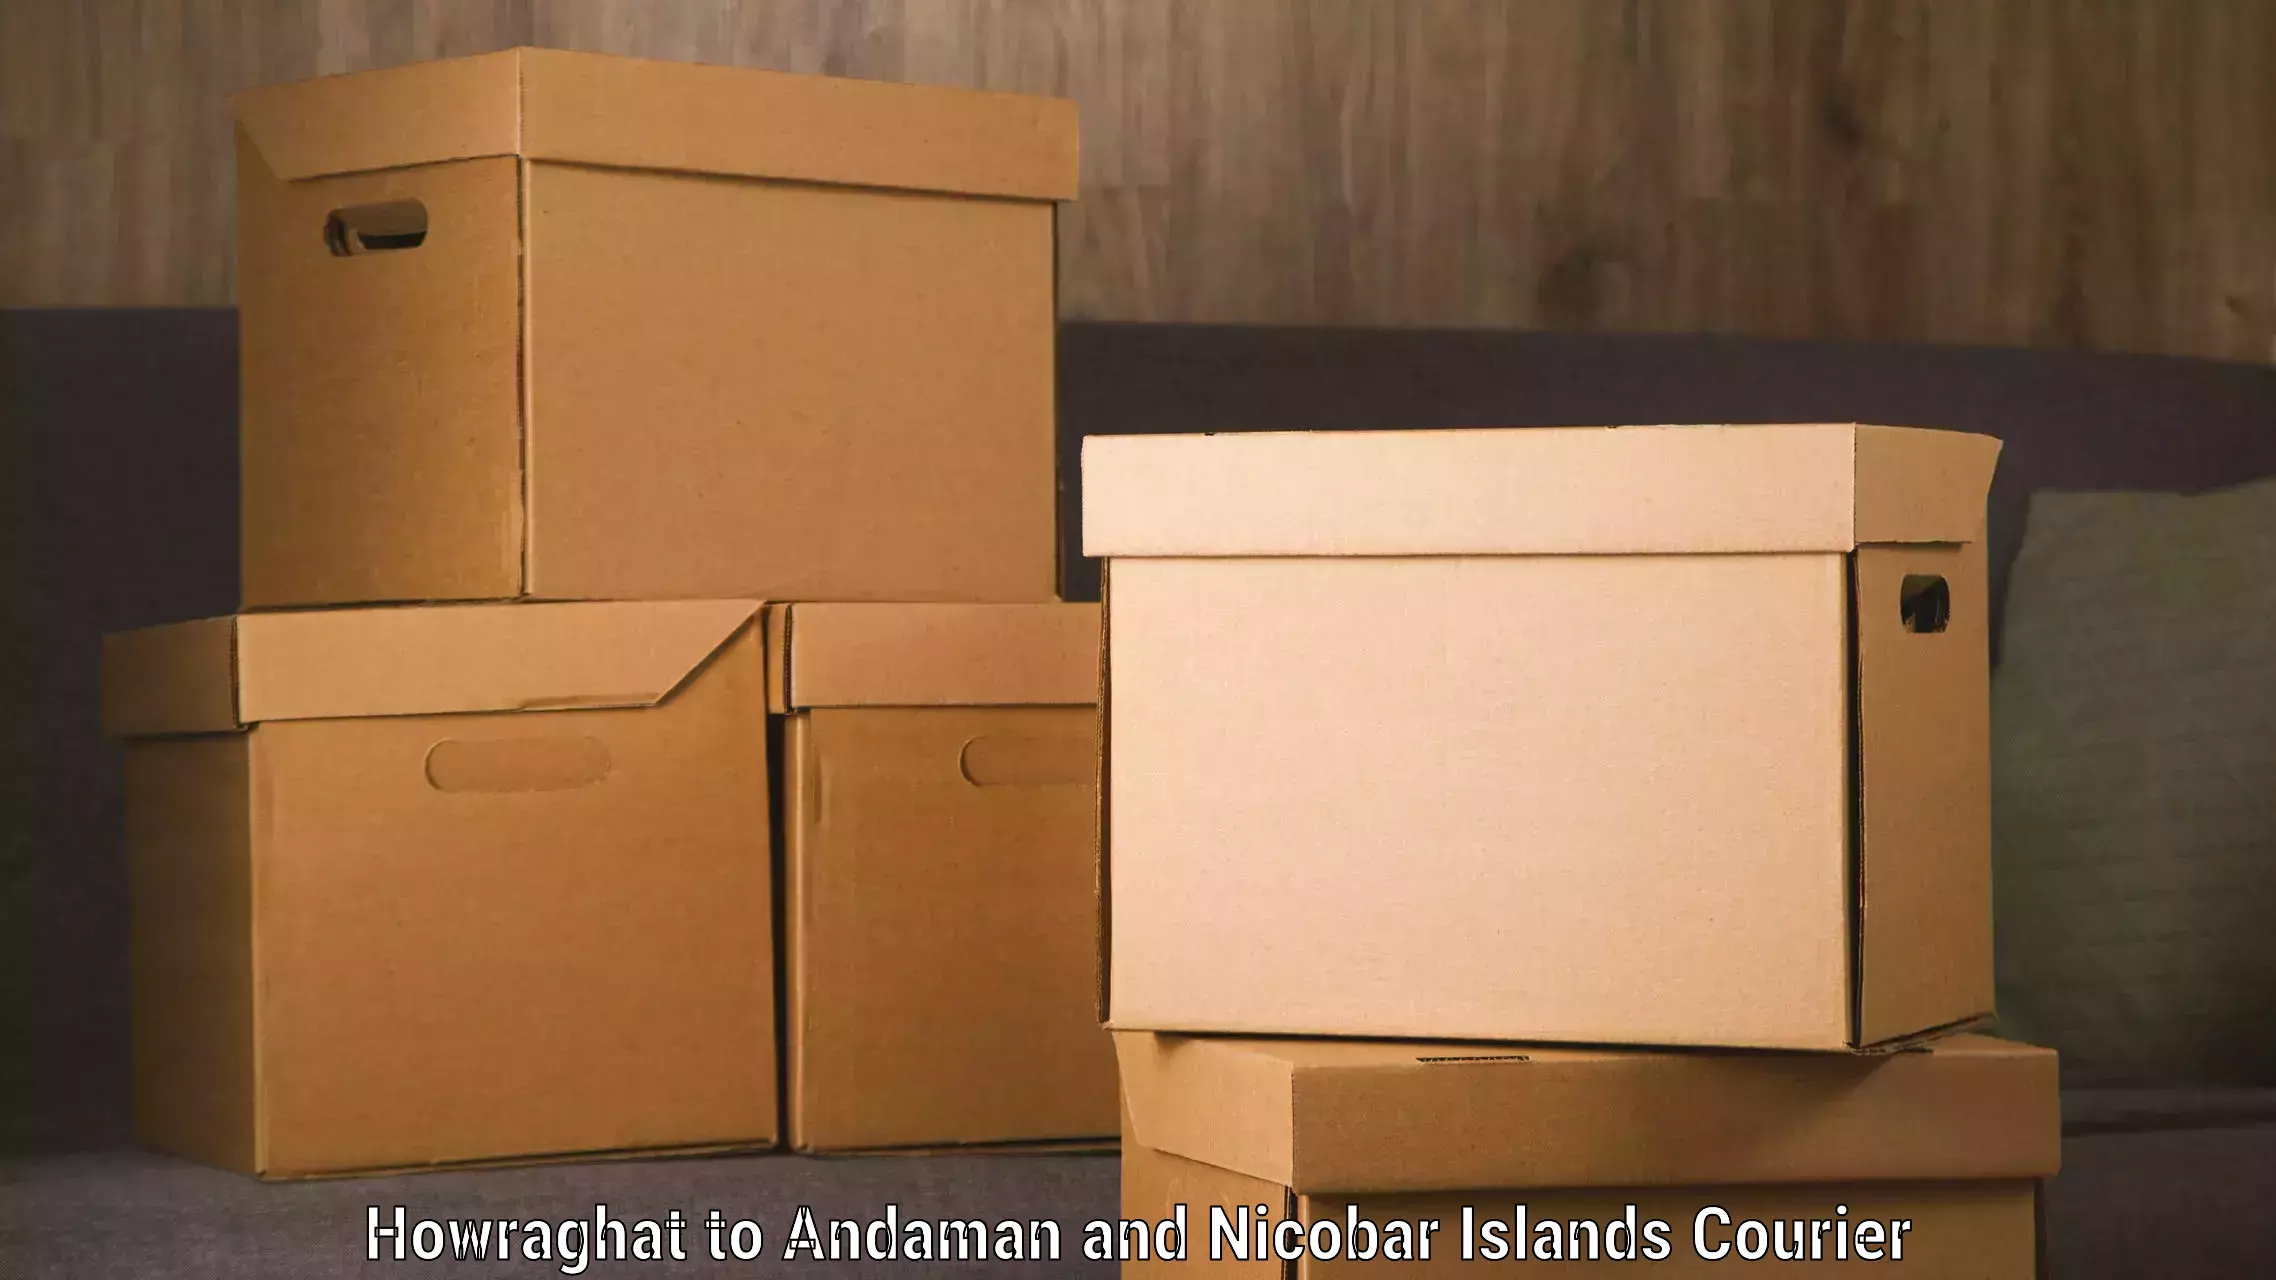 Baggage transport professionals Howraghat to Andaman and Nicobar Islands